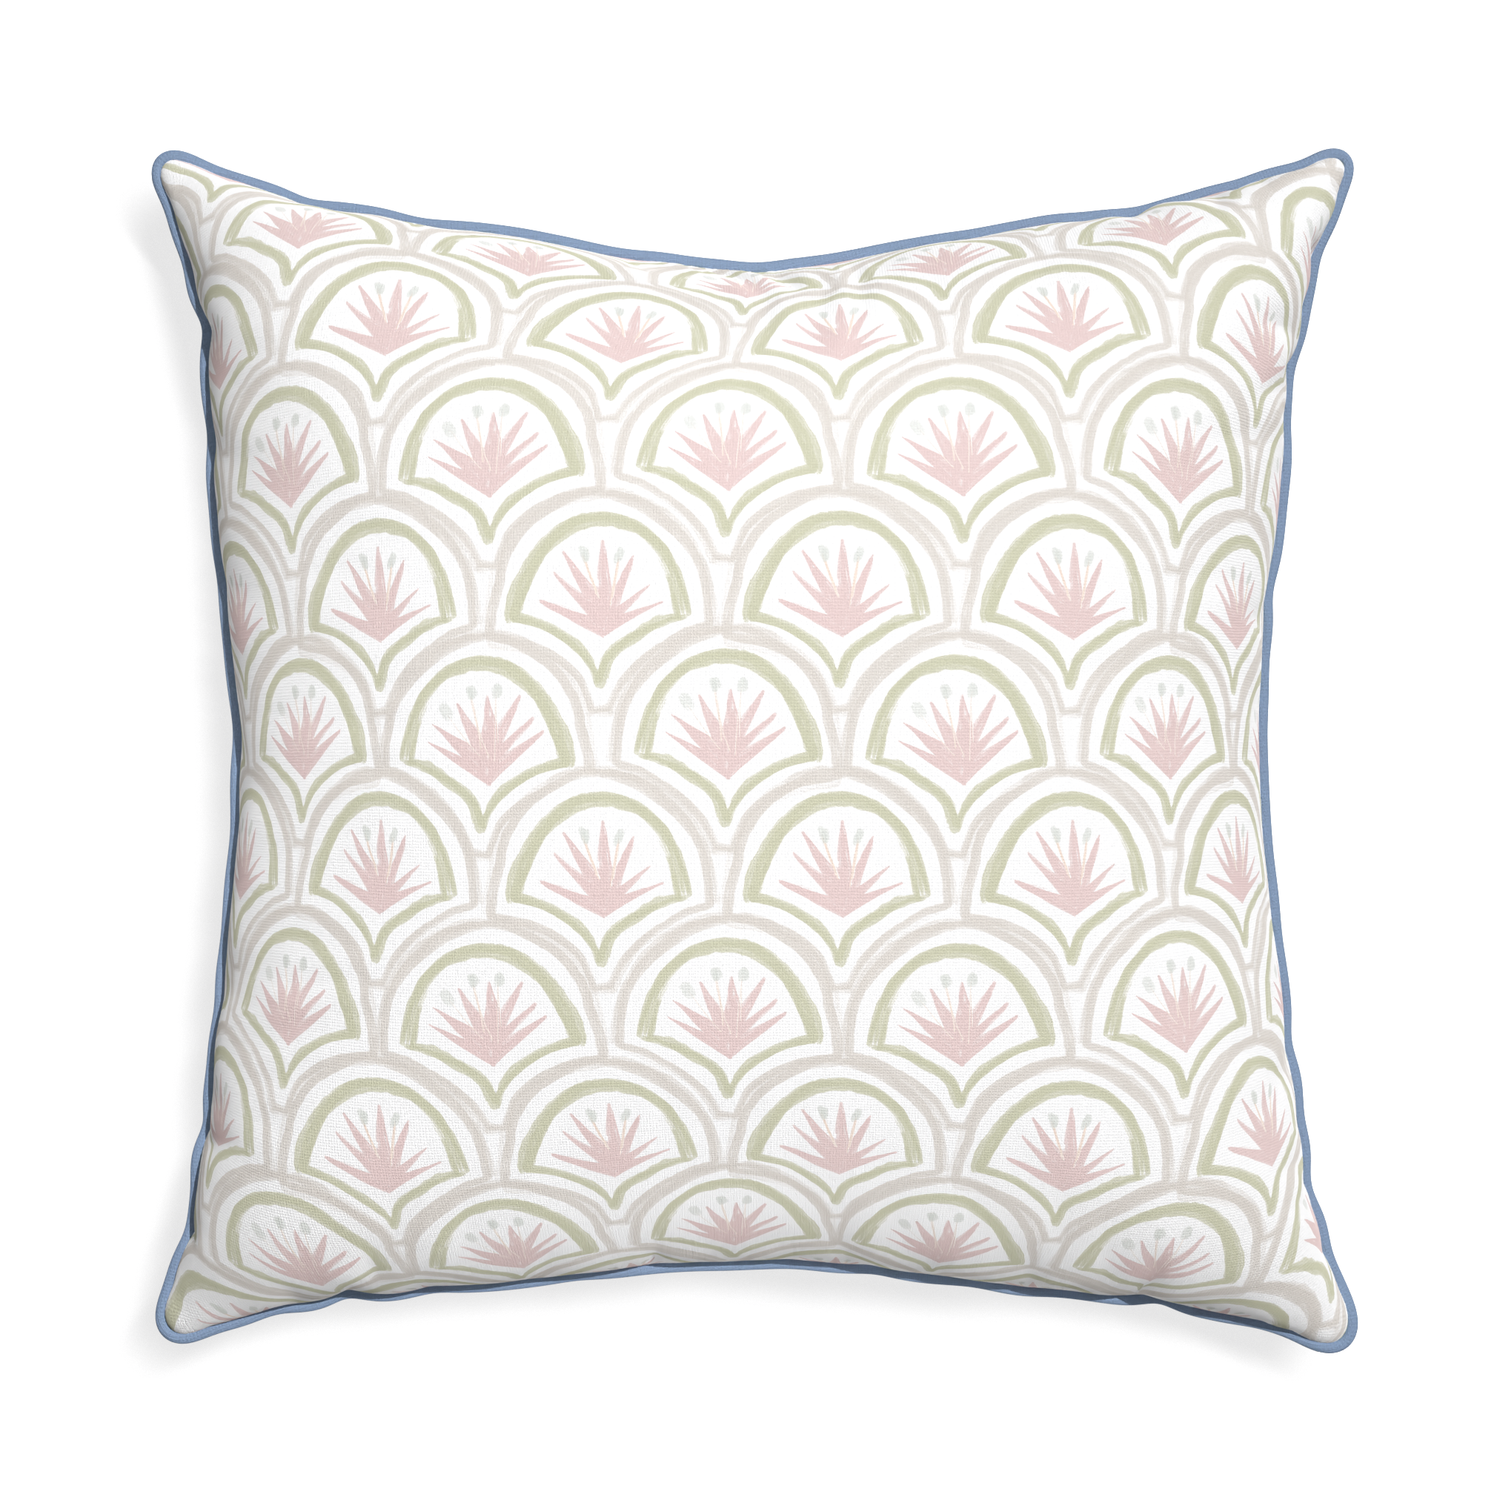 Euro-sham thatcher rose custom pink & green palmpillow with sky piping on white background